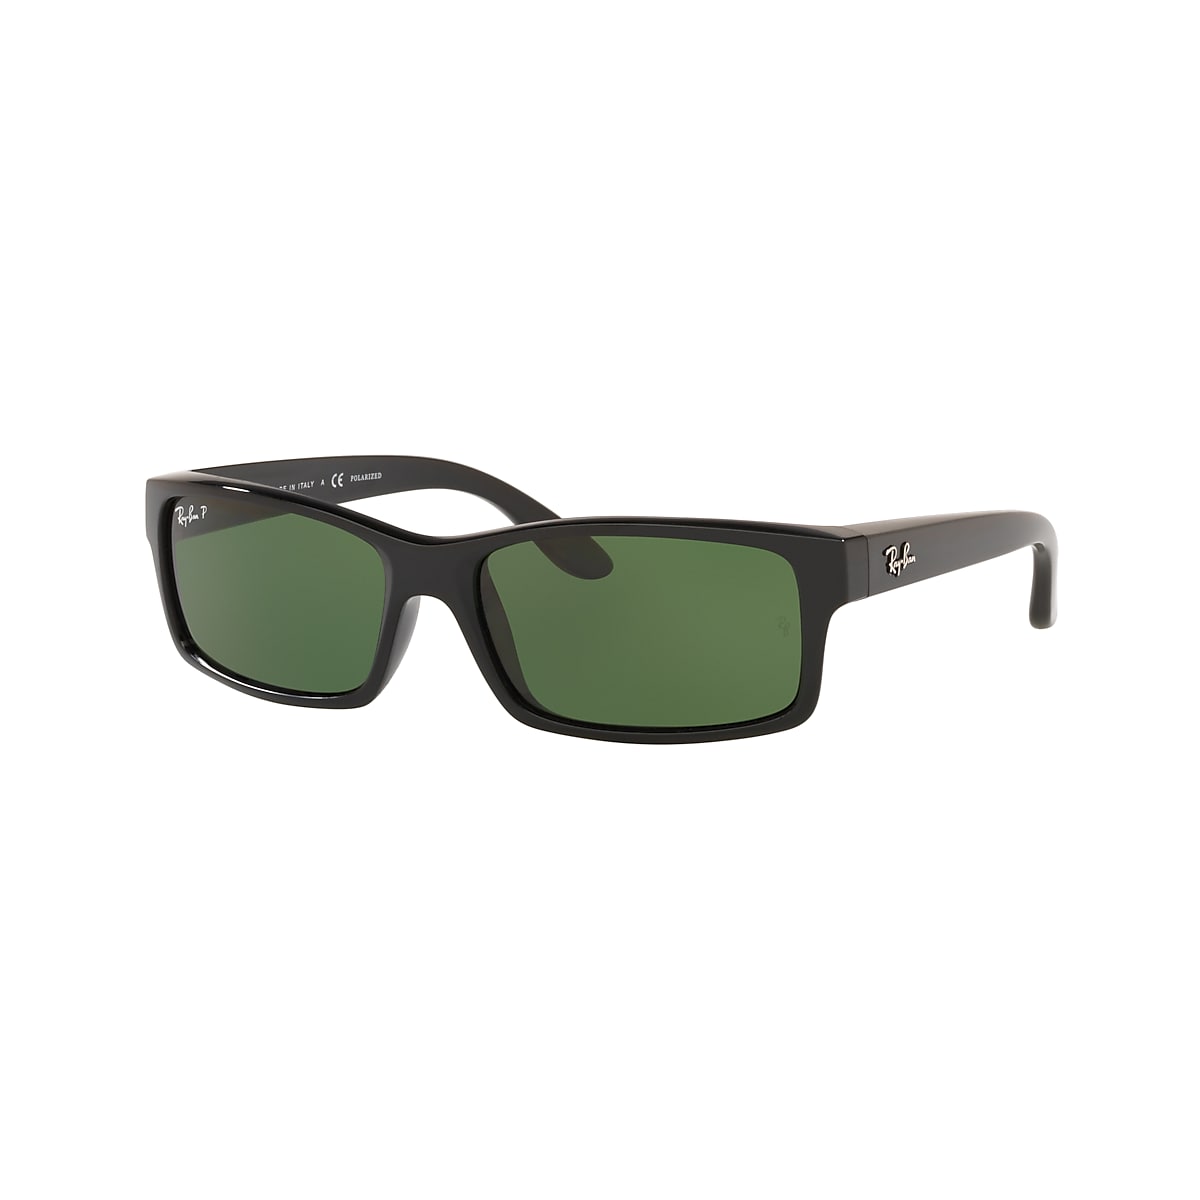 RB4151 Sunglasses in Black and Green - RB4151 | Ray-Ban® US